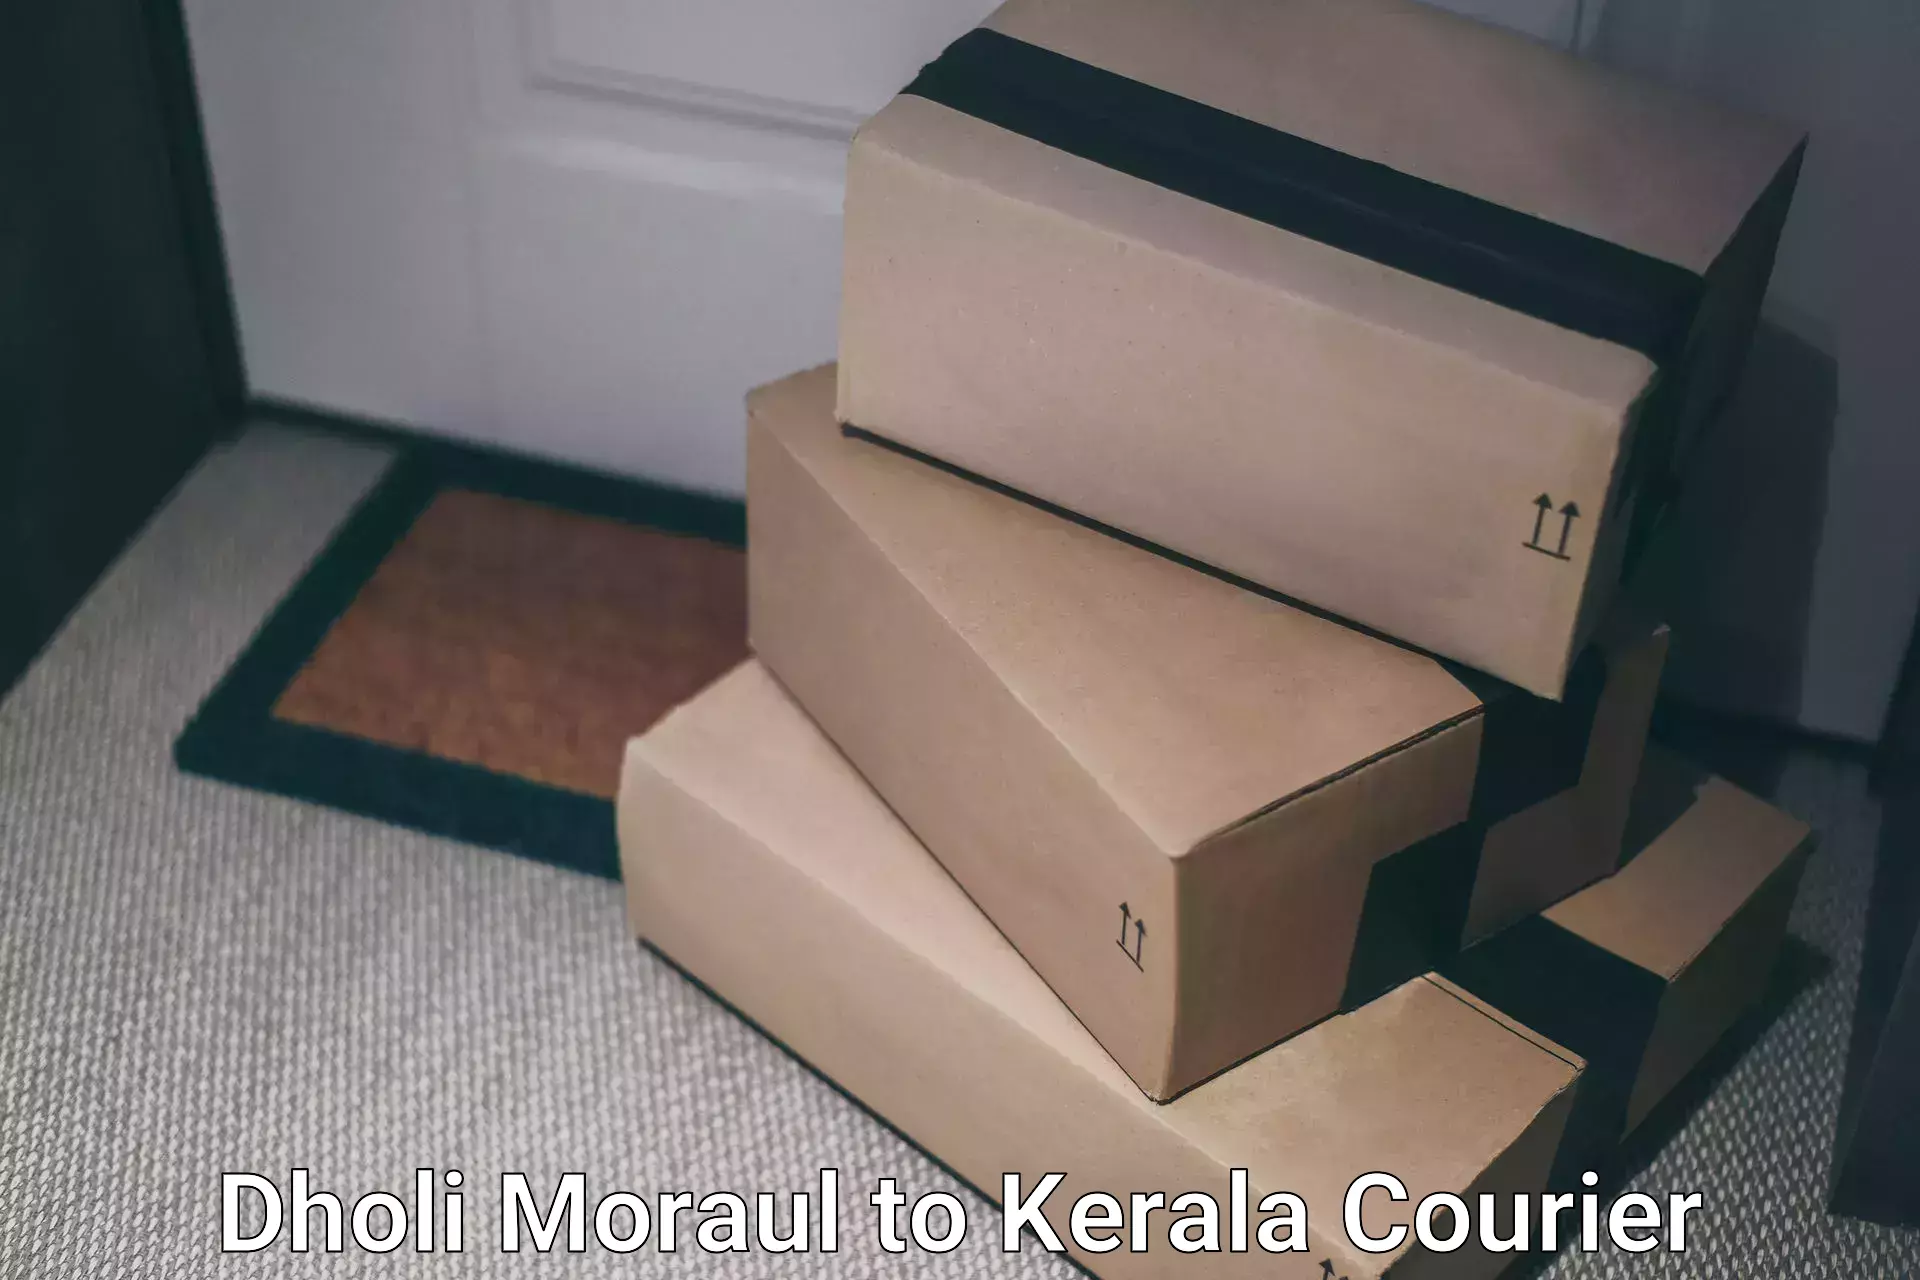 Comprehensive freight services Dholi Moraul to Kerala